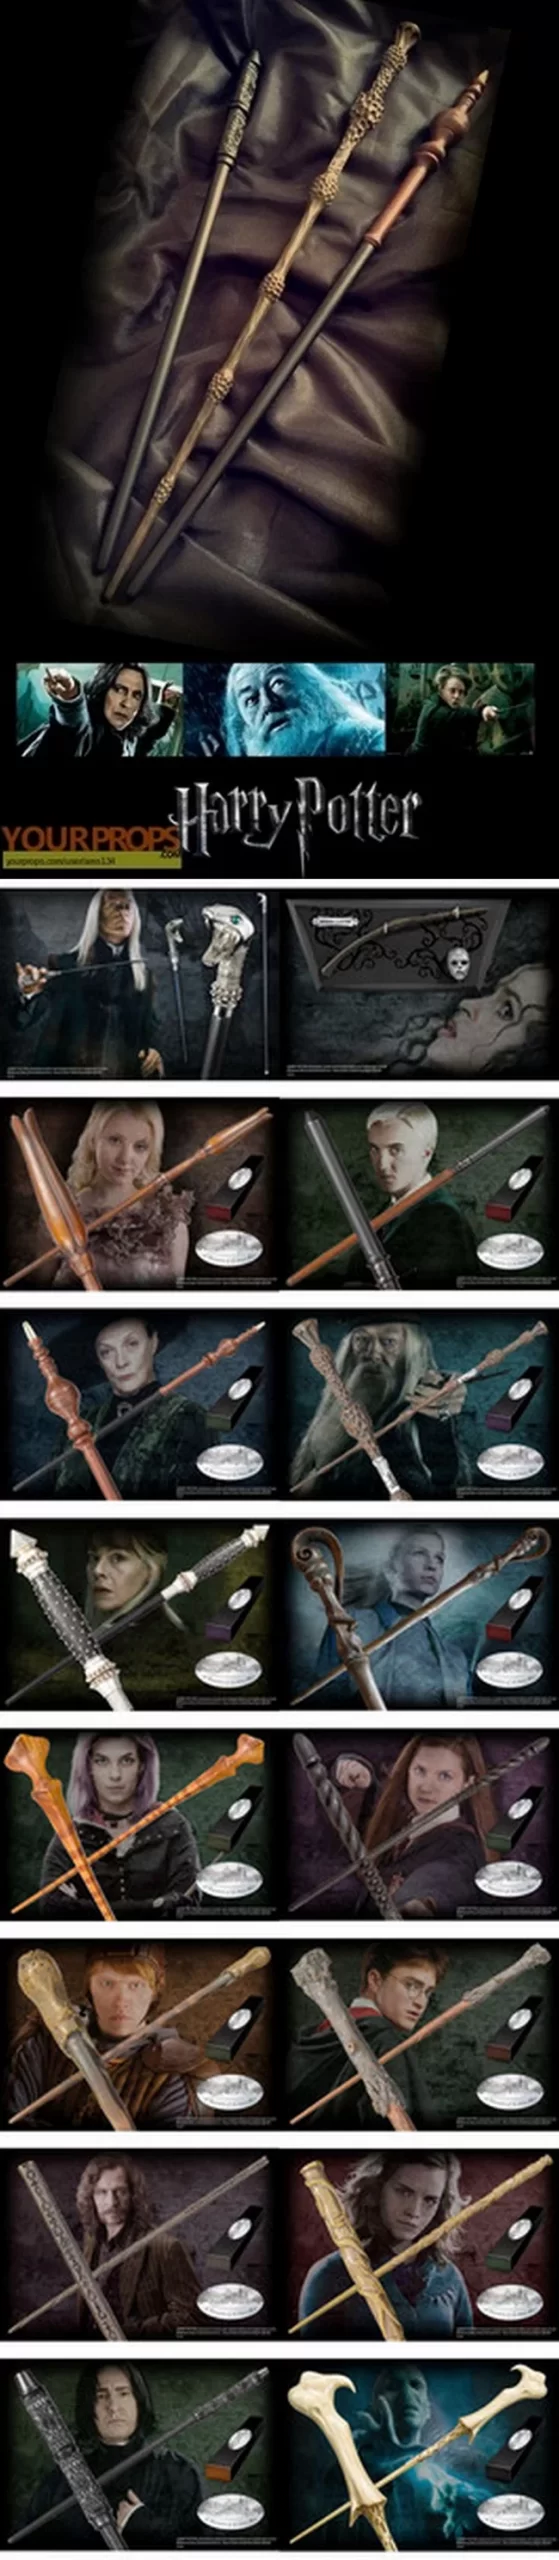 Harry Potter movies - Wands